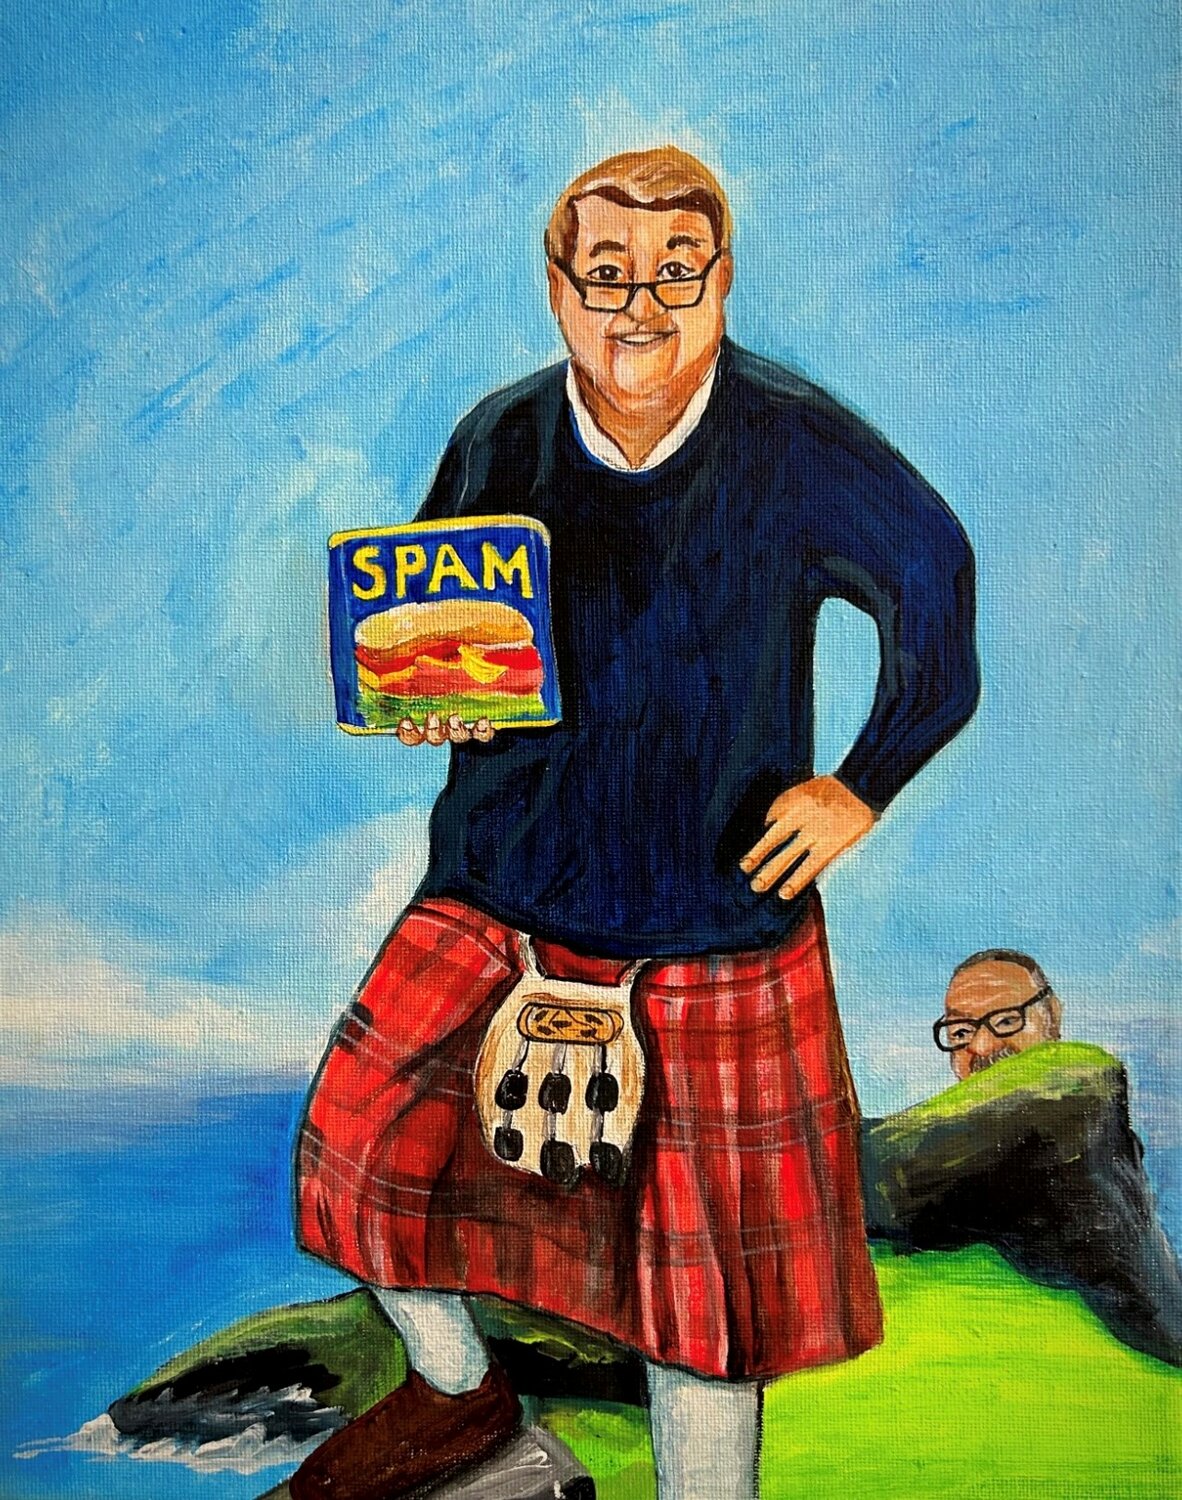 The painting of Jim Wilson, Callicoon Brewing Company owner and "Ciliberto & Friends" guest, in a kilt—holding up a can of SPAM.